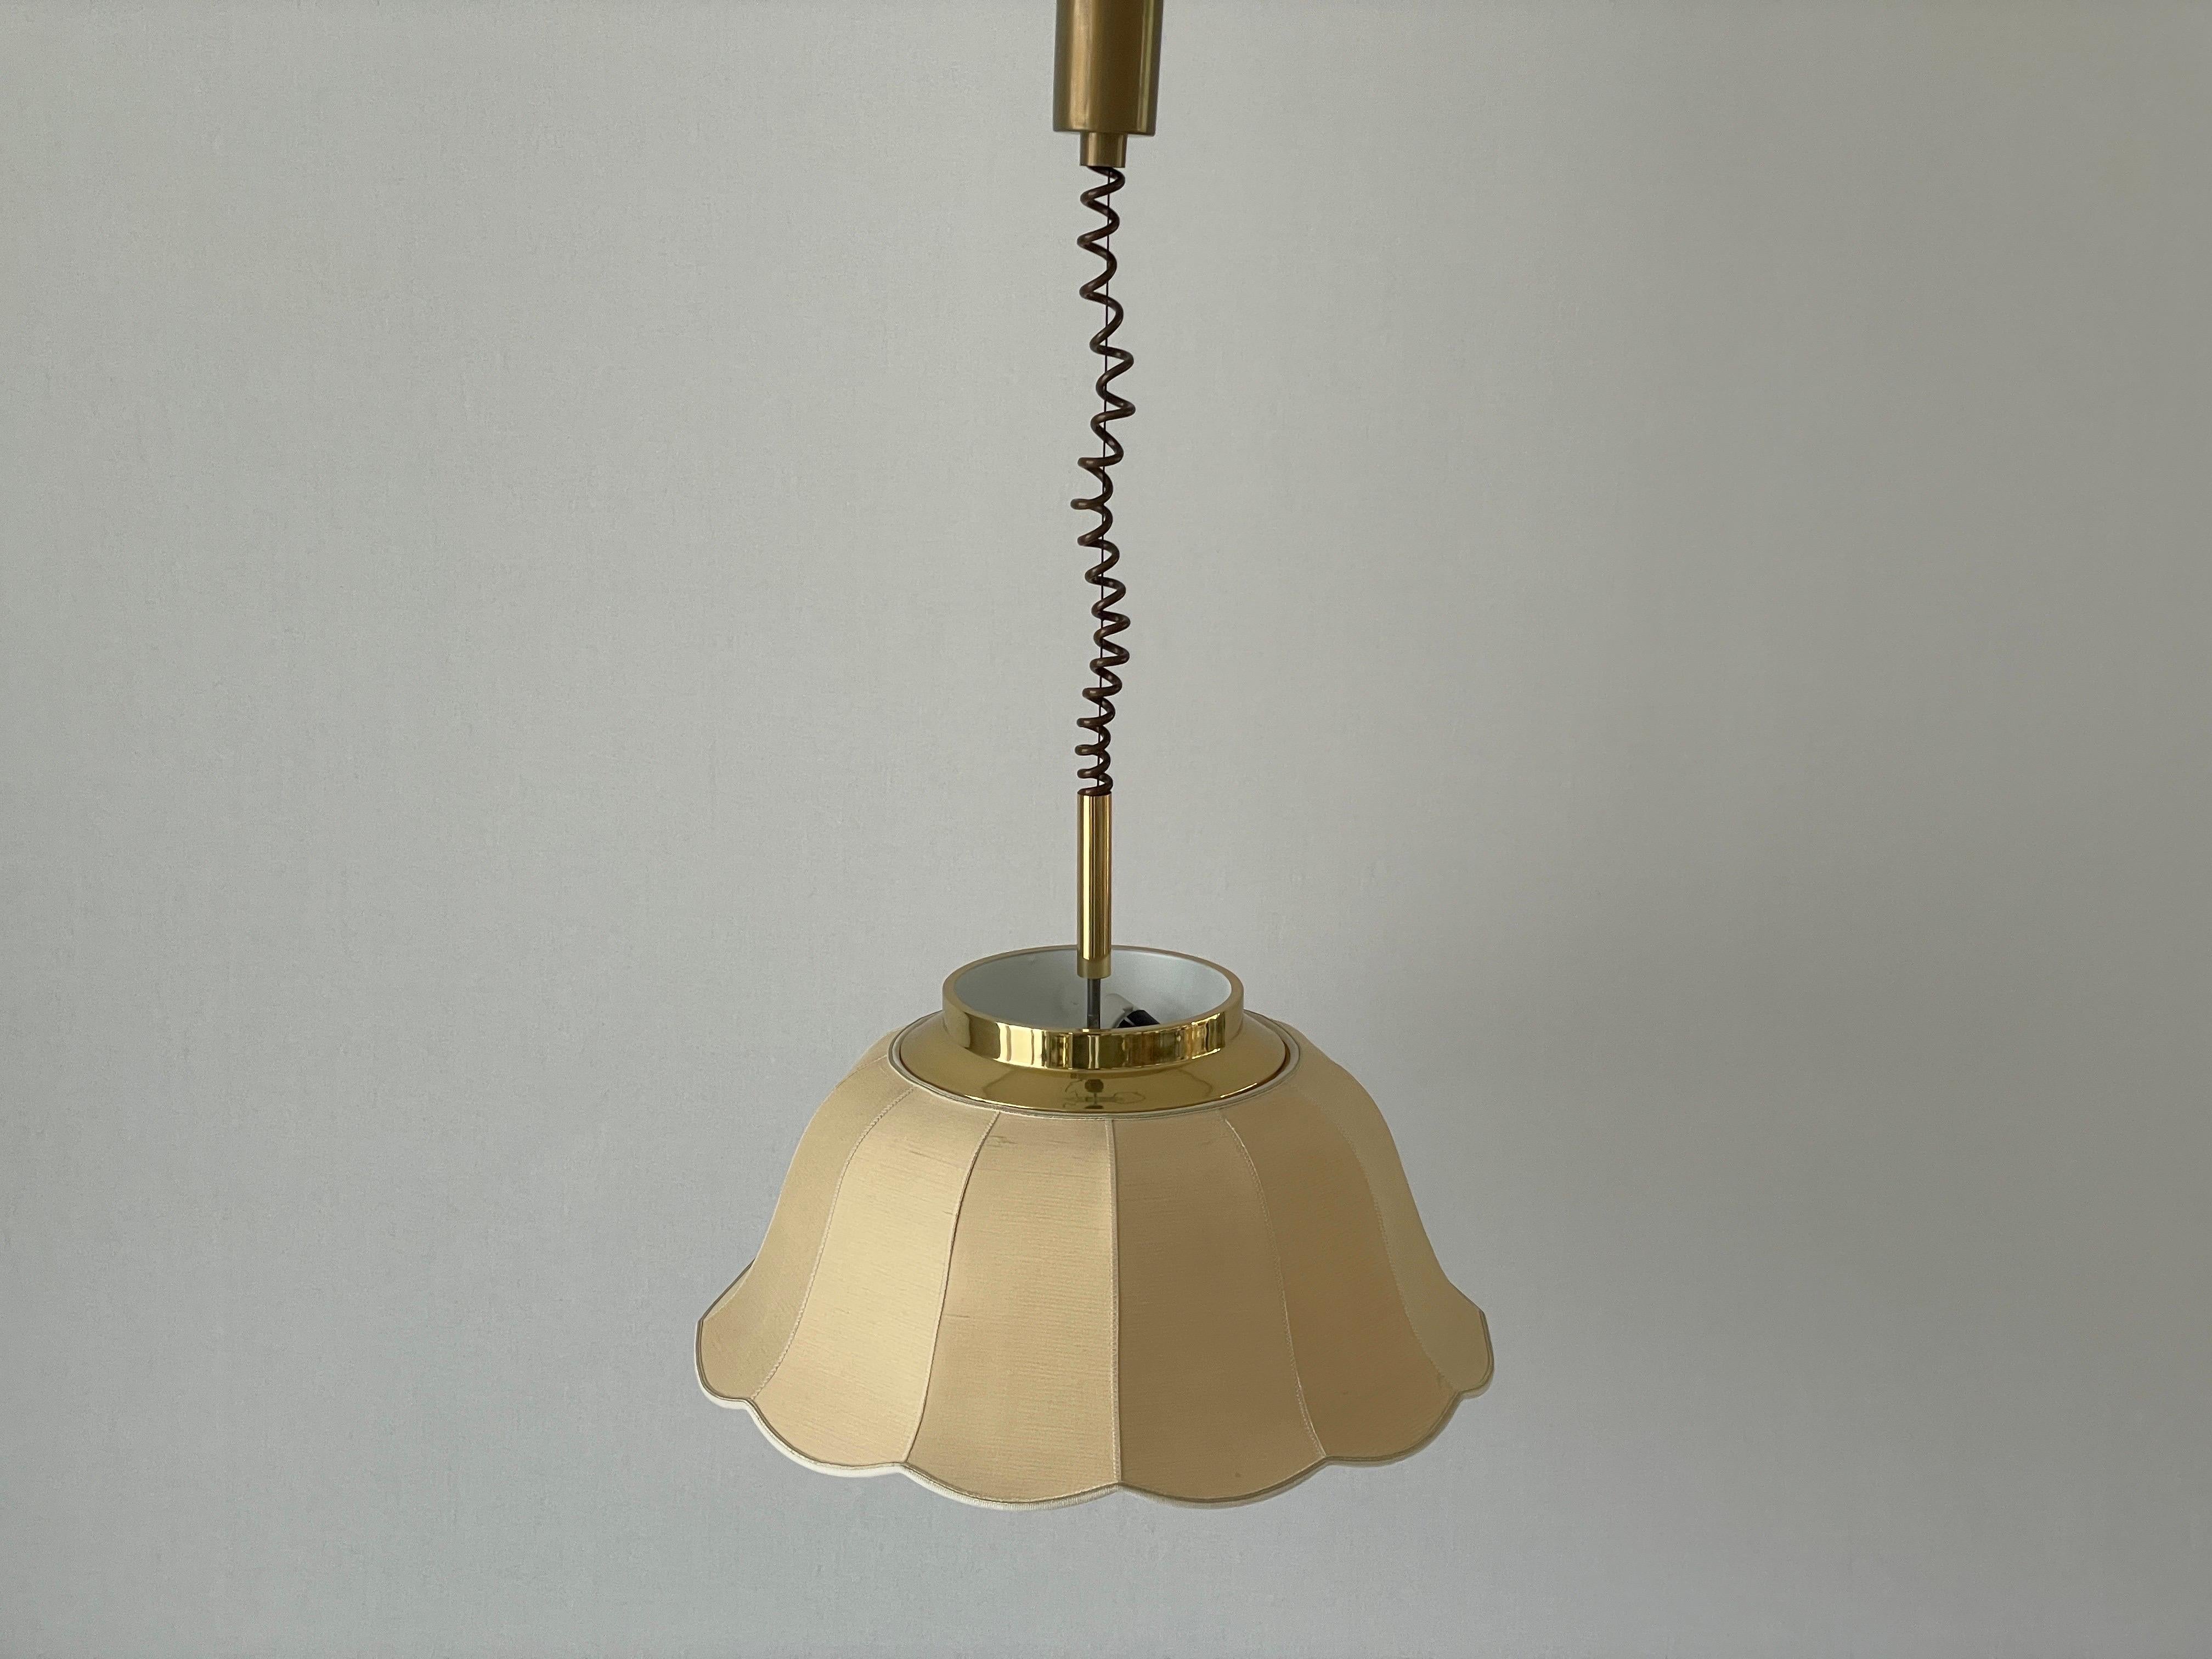 Fabric and Brass 5 socket Adjustable Shade Pendant Lamp by WKR, 1970s, Germany For Sale 4